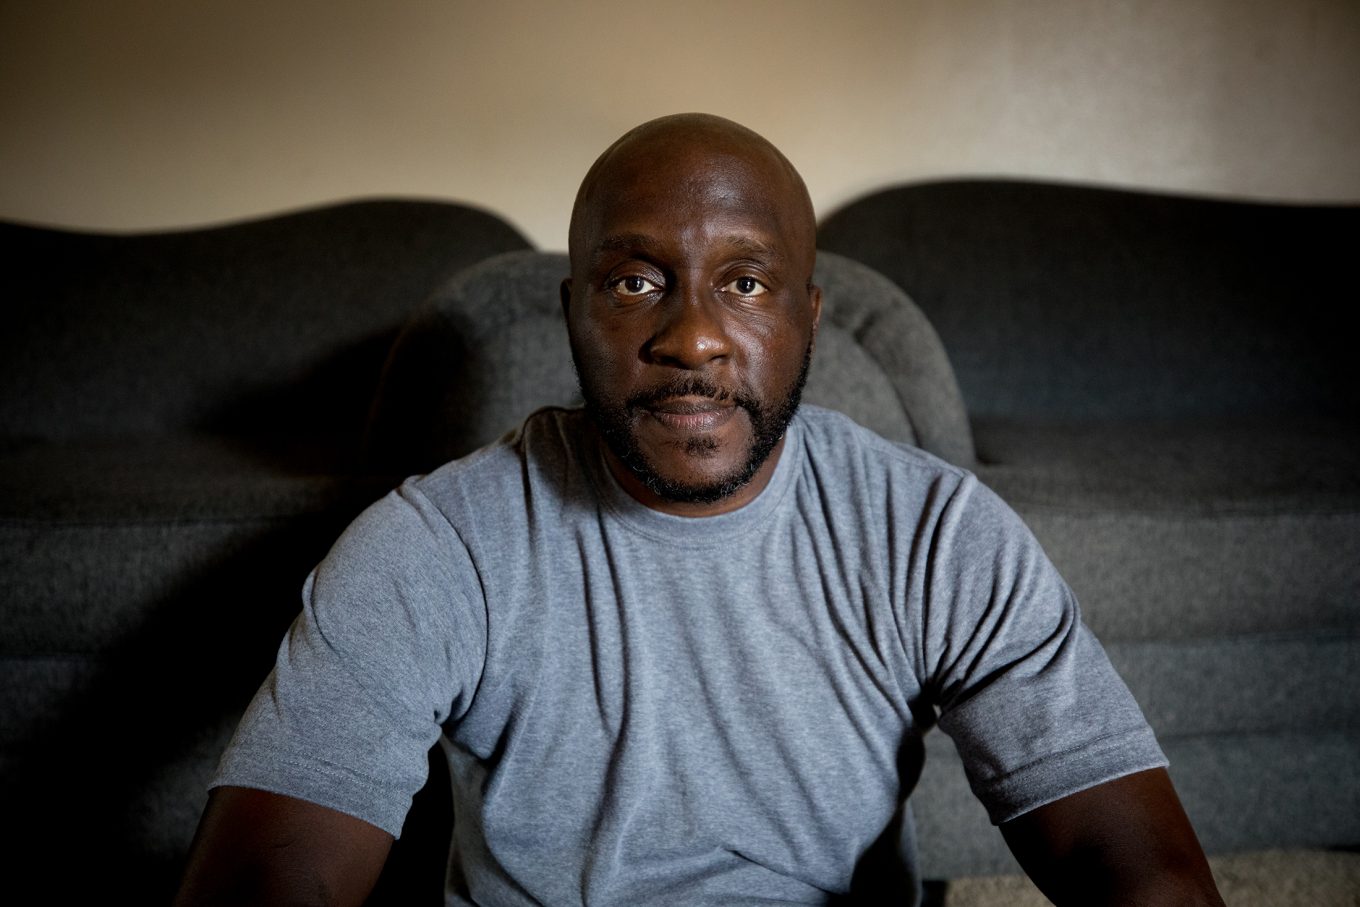 Some of the child support debt Marc Wilson racked up while in prison has been forgiven. He feels relieved — and guilty. / Photo: Allison V. Smith for KERA